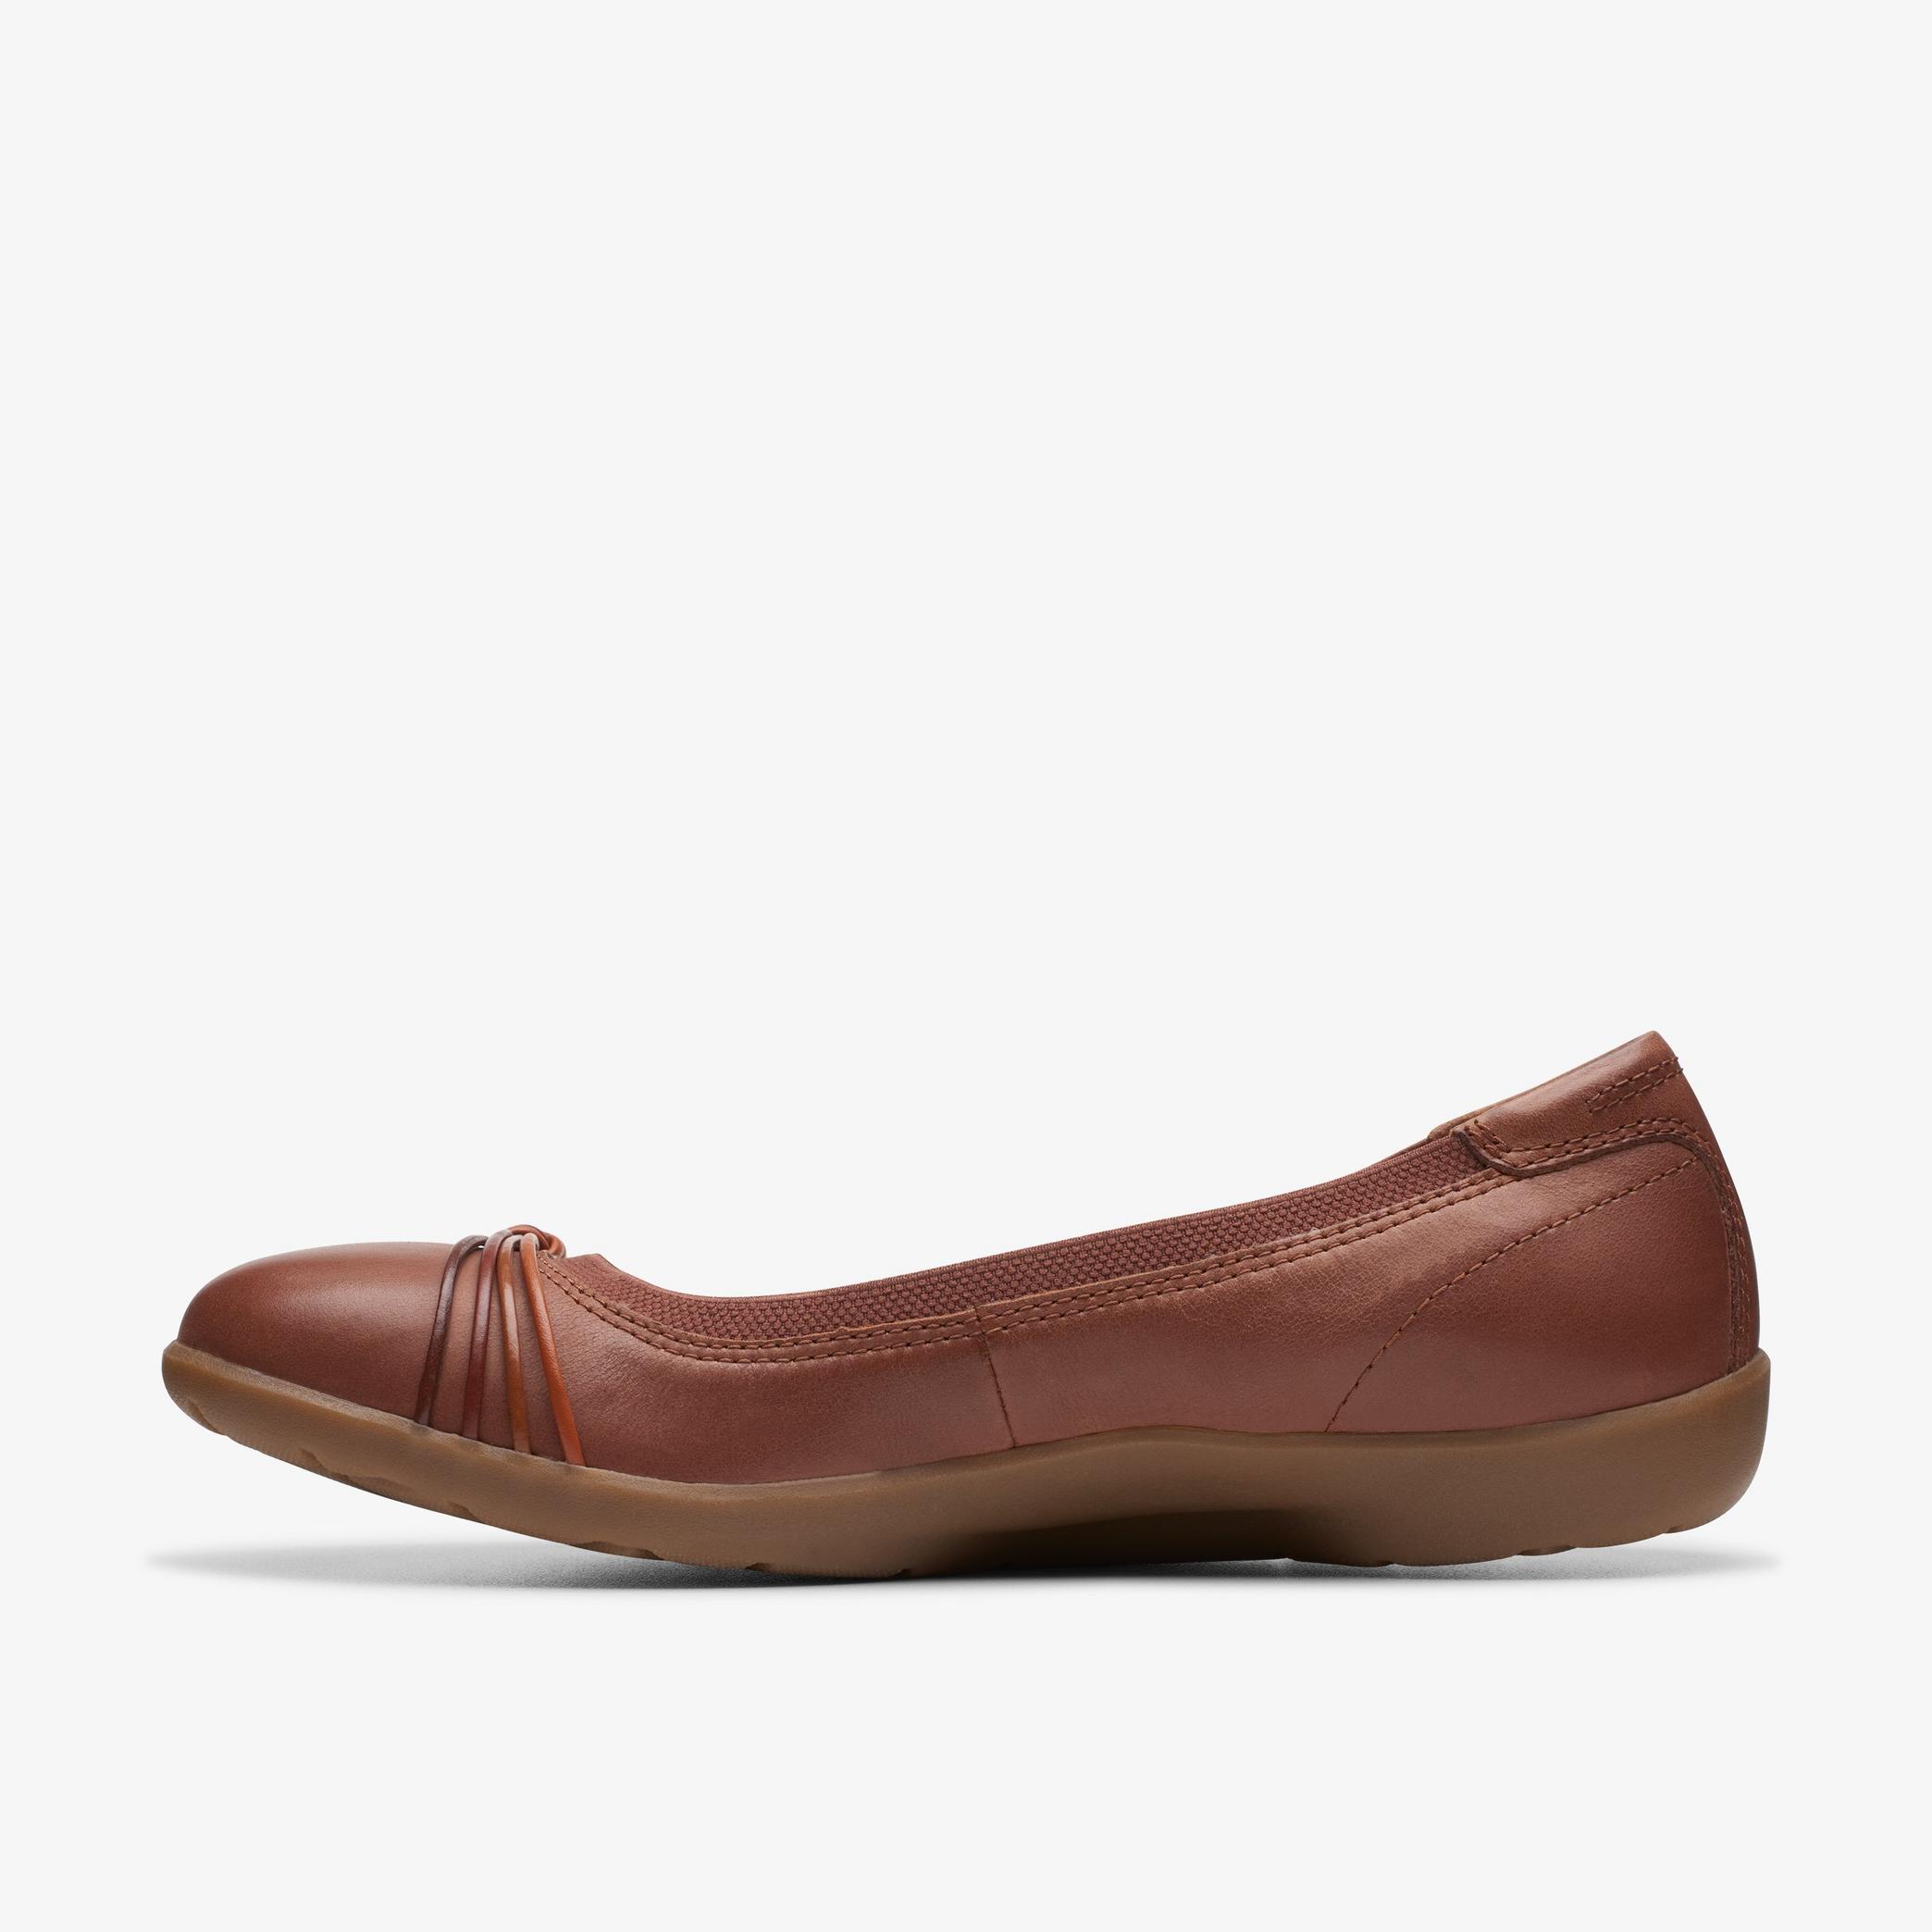 Meadow Rae Tan Leather Ballerina Shoes, view 2 of 6